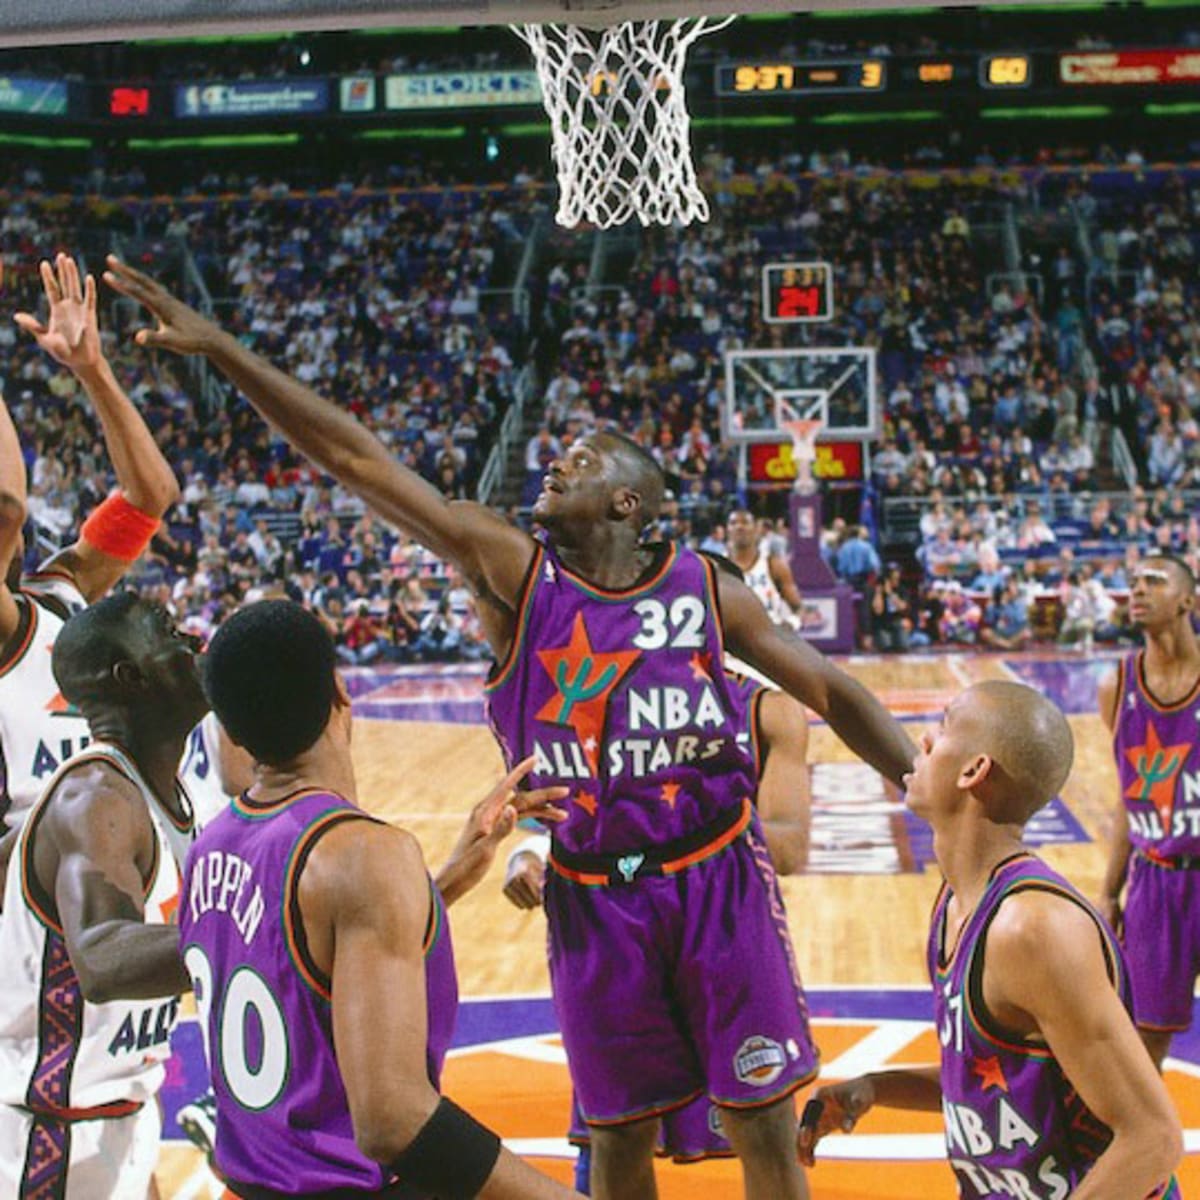 NBA All-Star Game: Remembering the 1995 